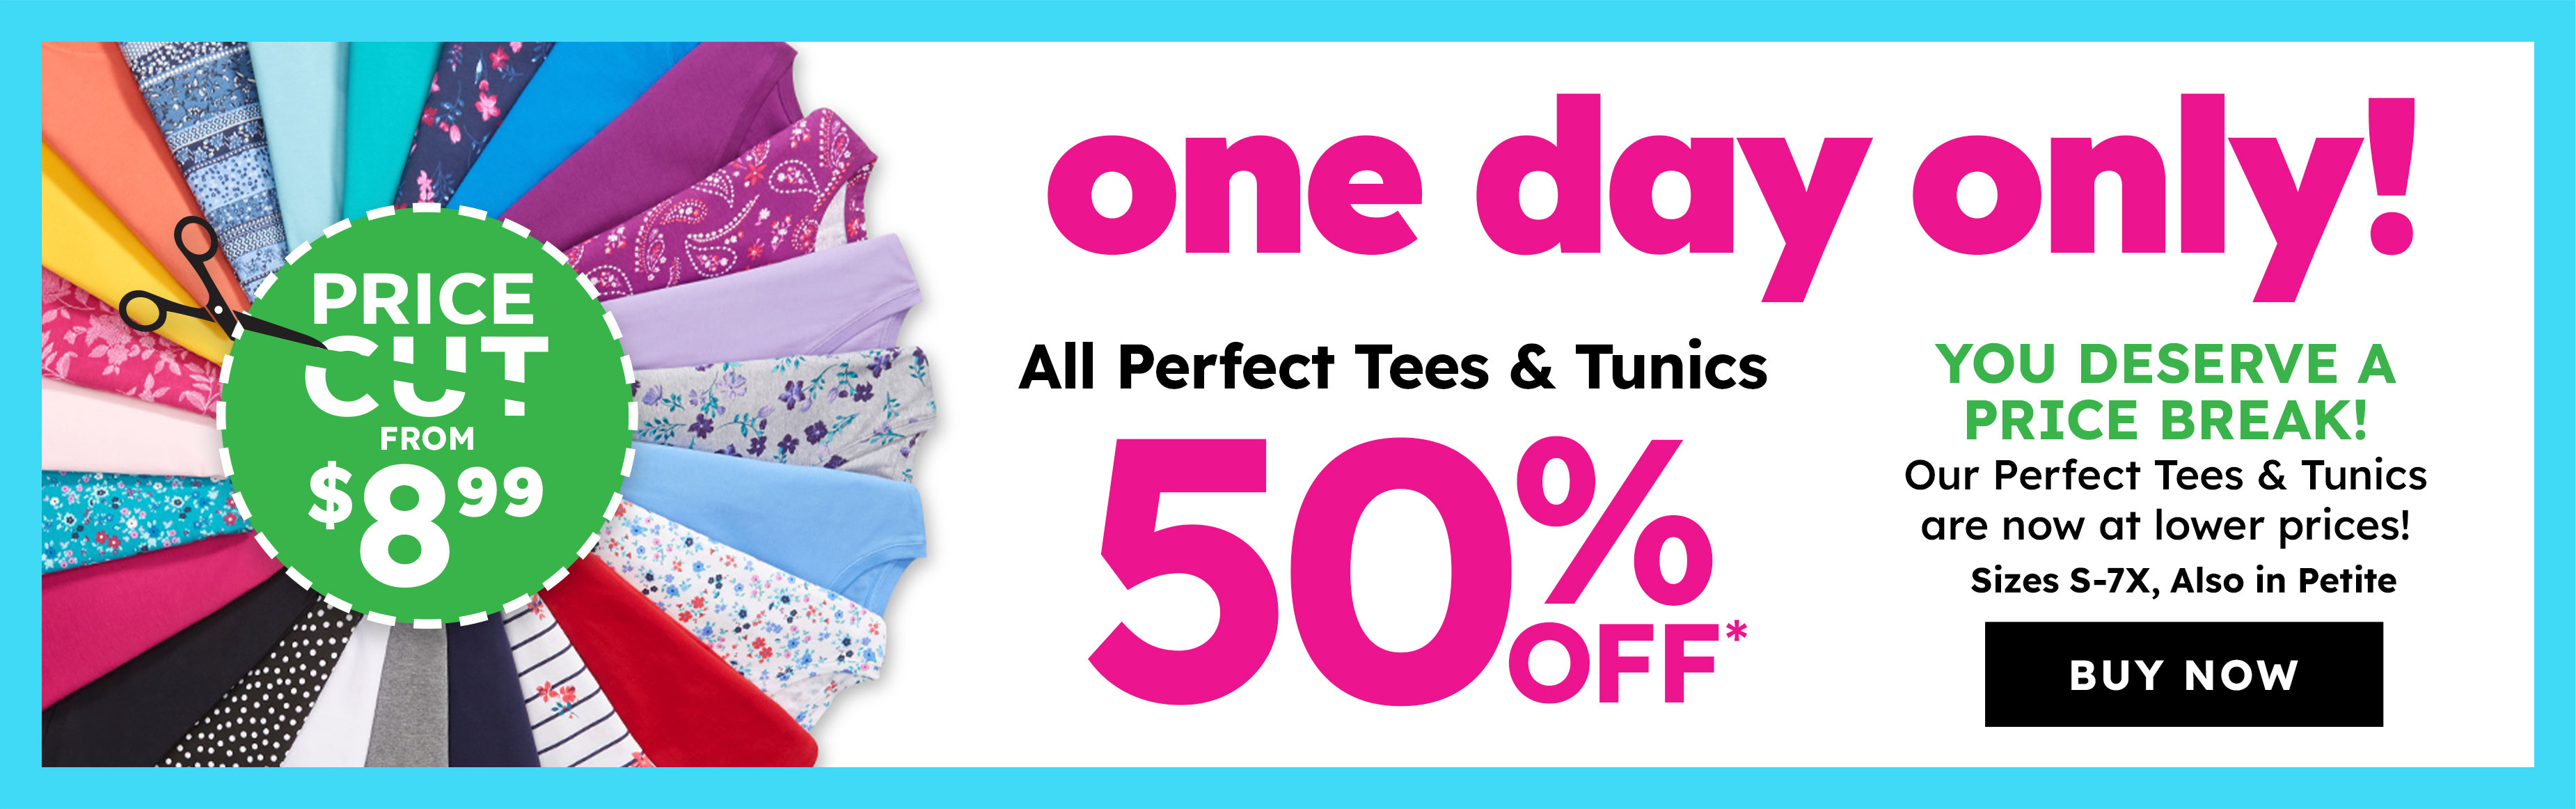 ONE DAY ONLY SALE 50% OFF PERFECT TEES & TUNICS Buy Now